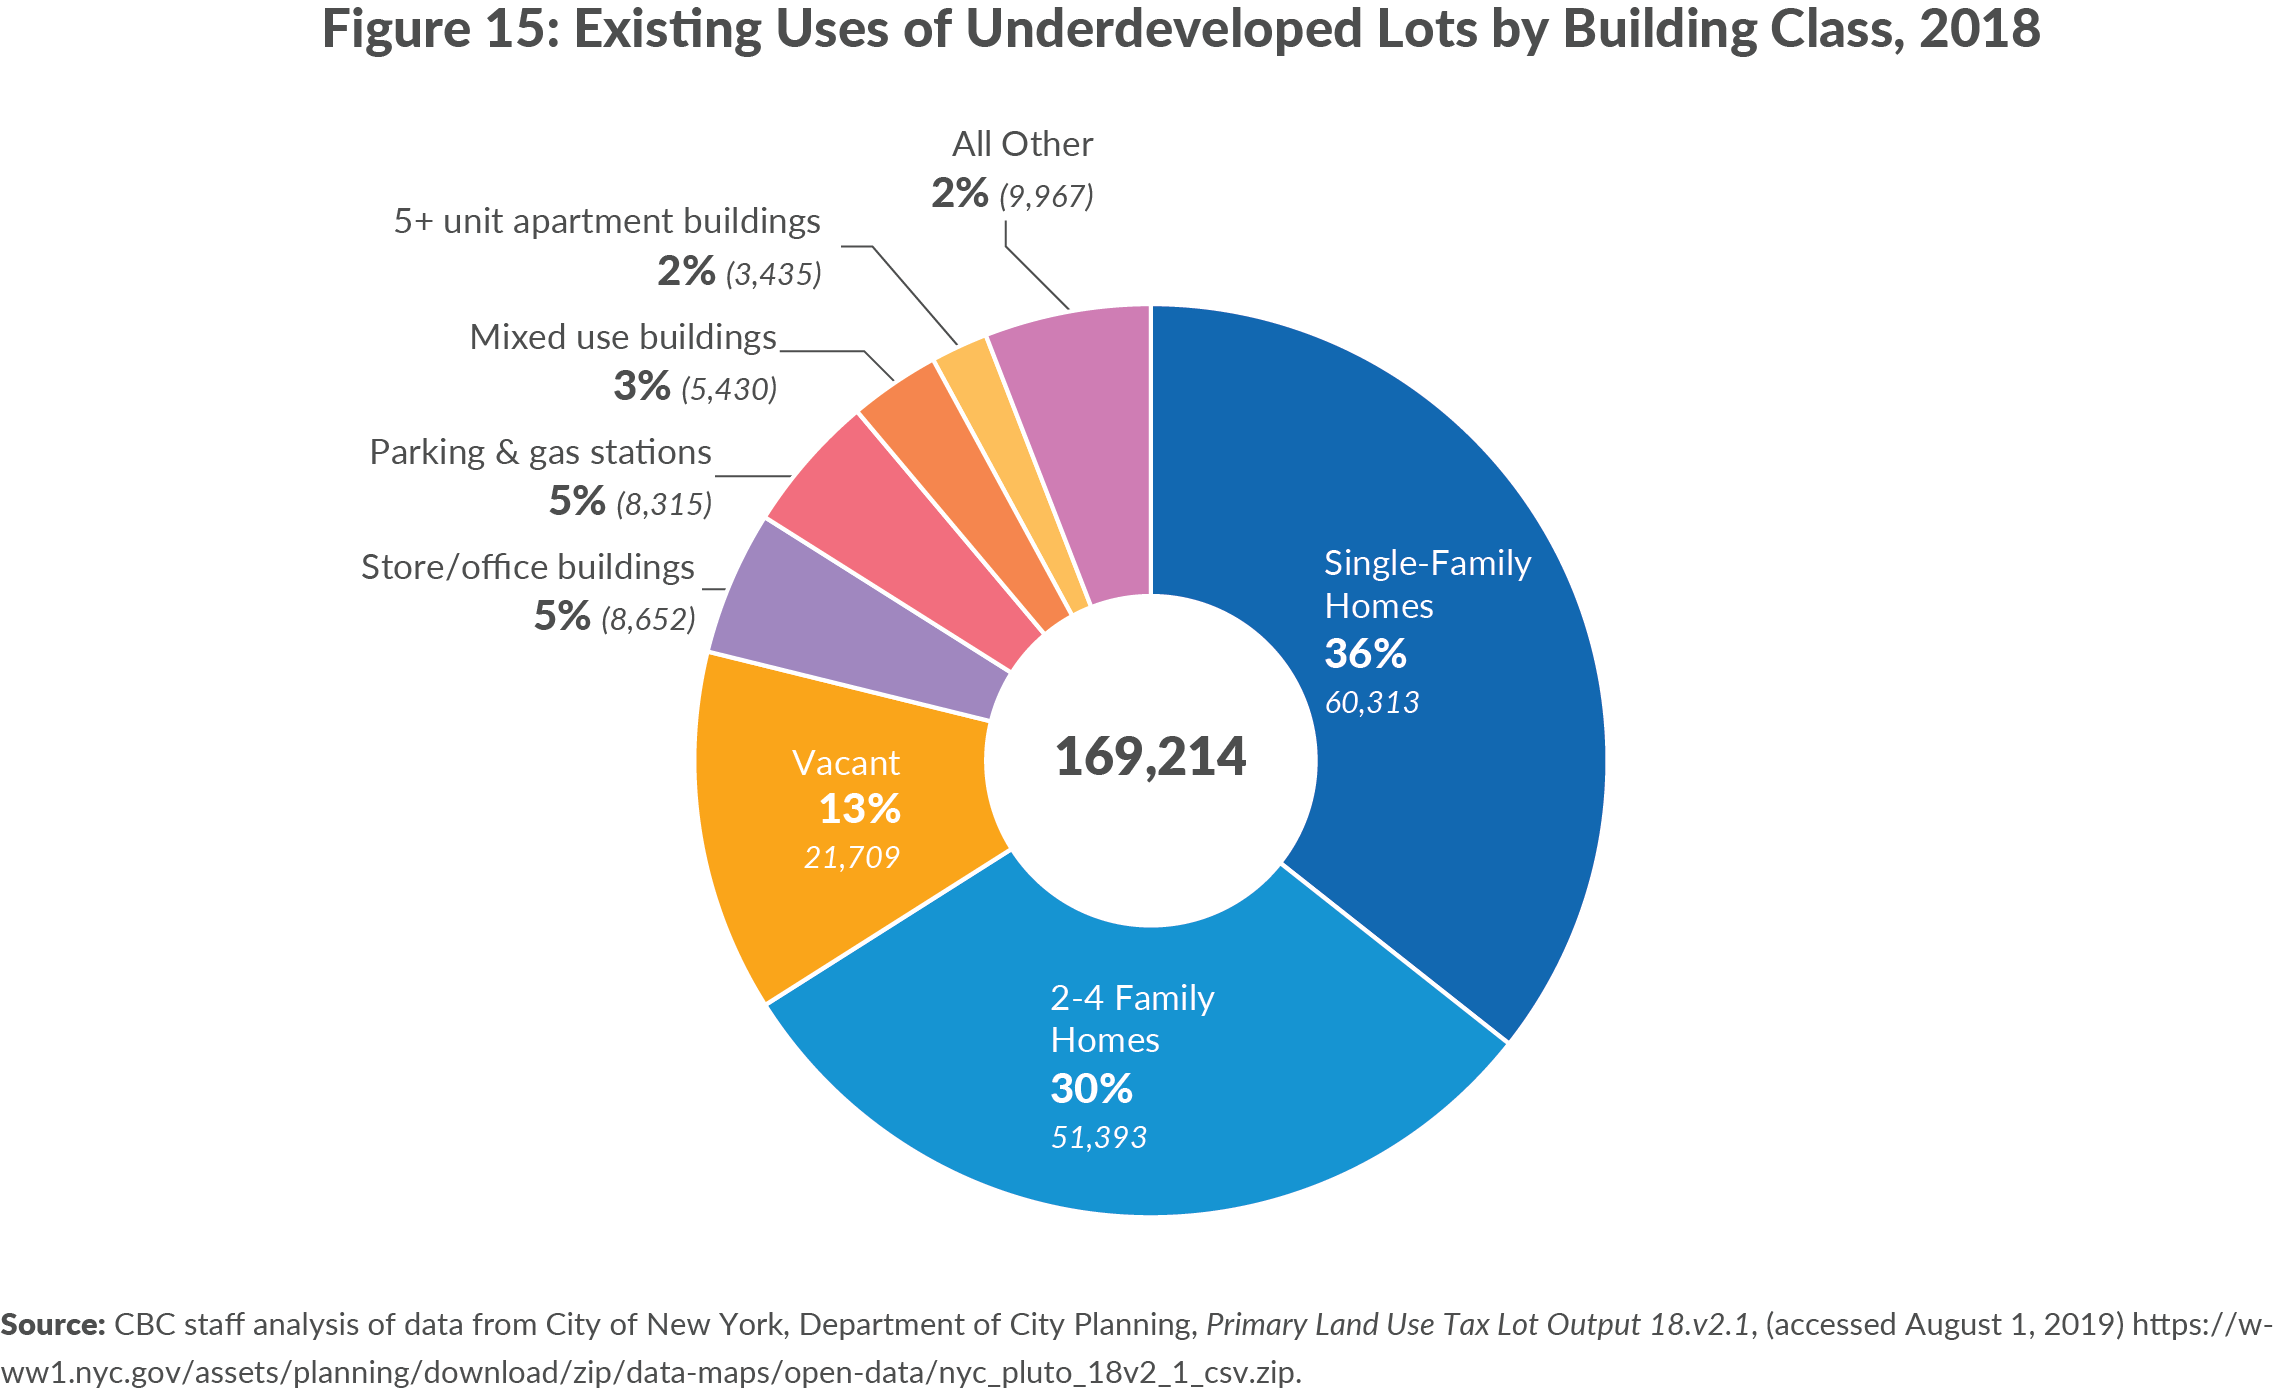 Figure 15. Existing Uses of Underdeveloped Lots by Building Class